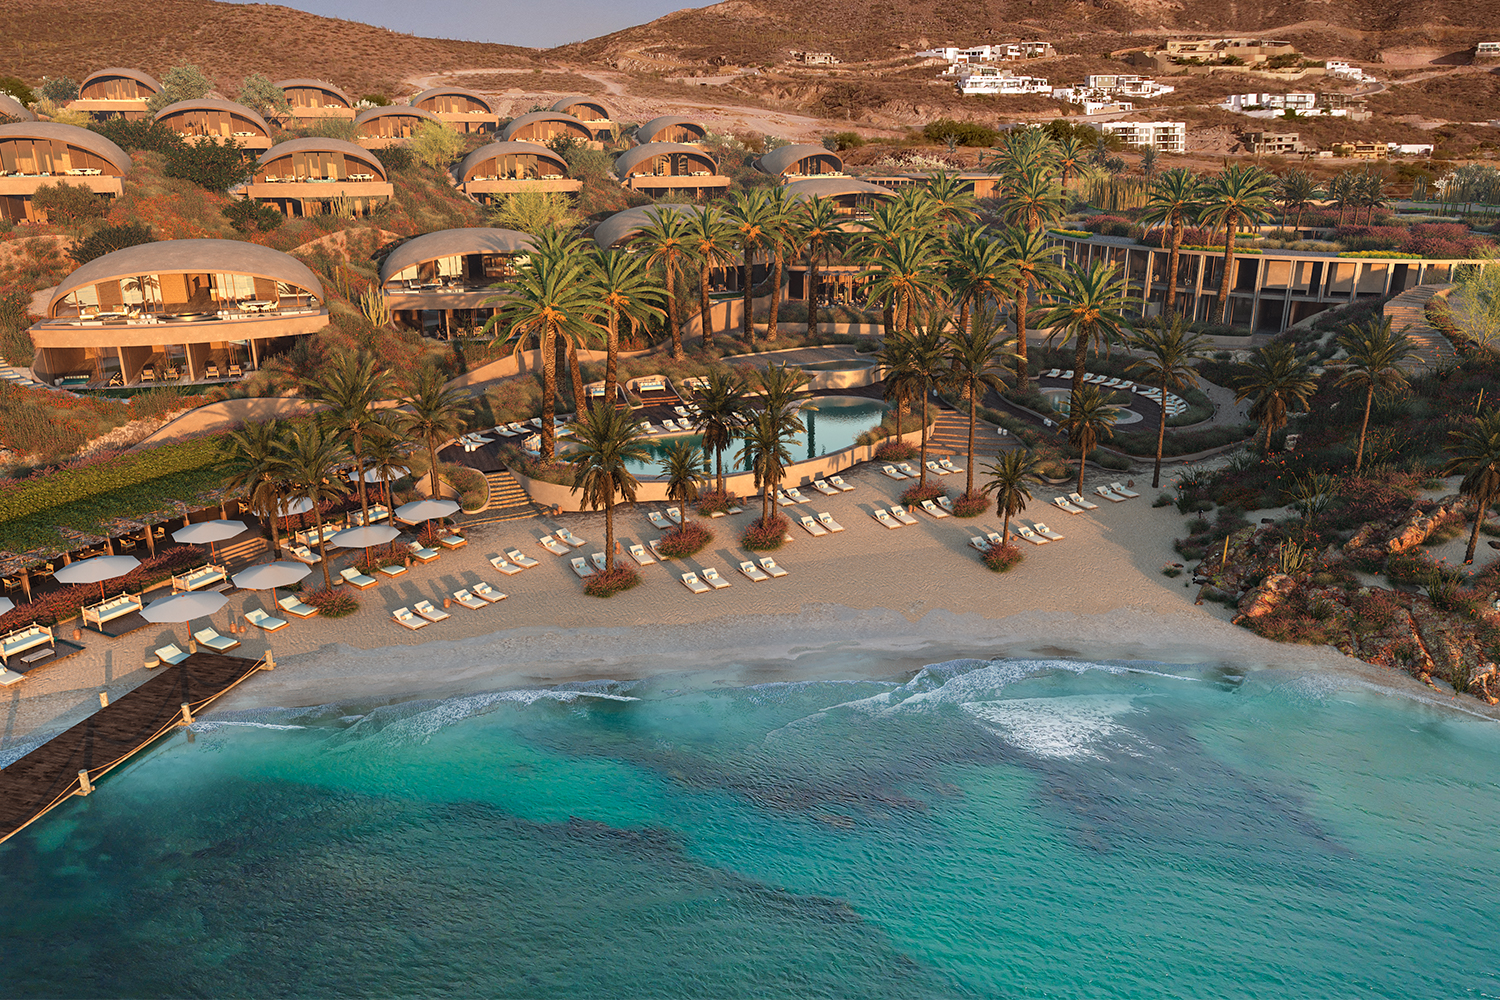 A first look at the Chablé Sea of Cortez Resort in Baja California Sur, Mexico